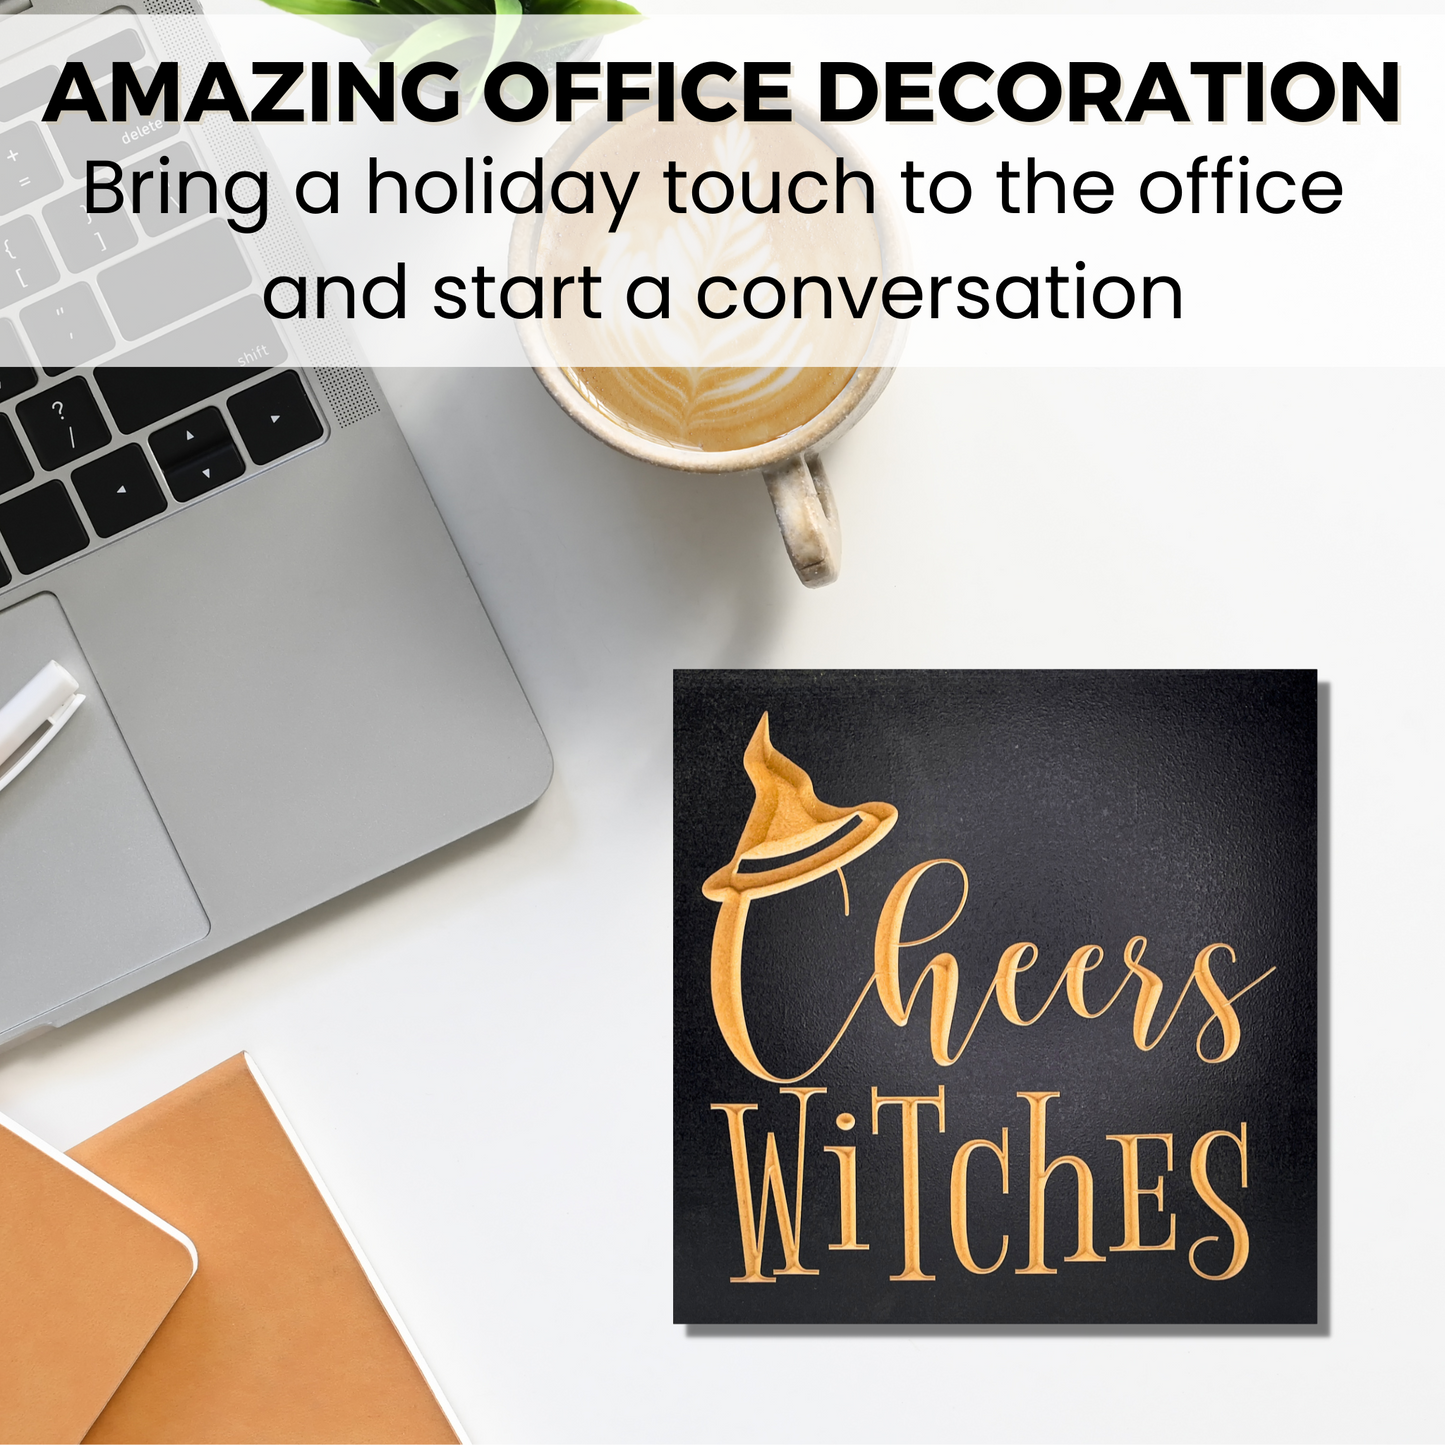 Cheers Witches Carved Wooden Halloween Office Decoration